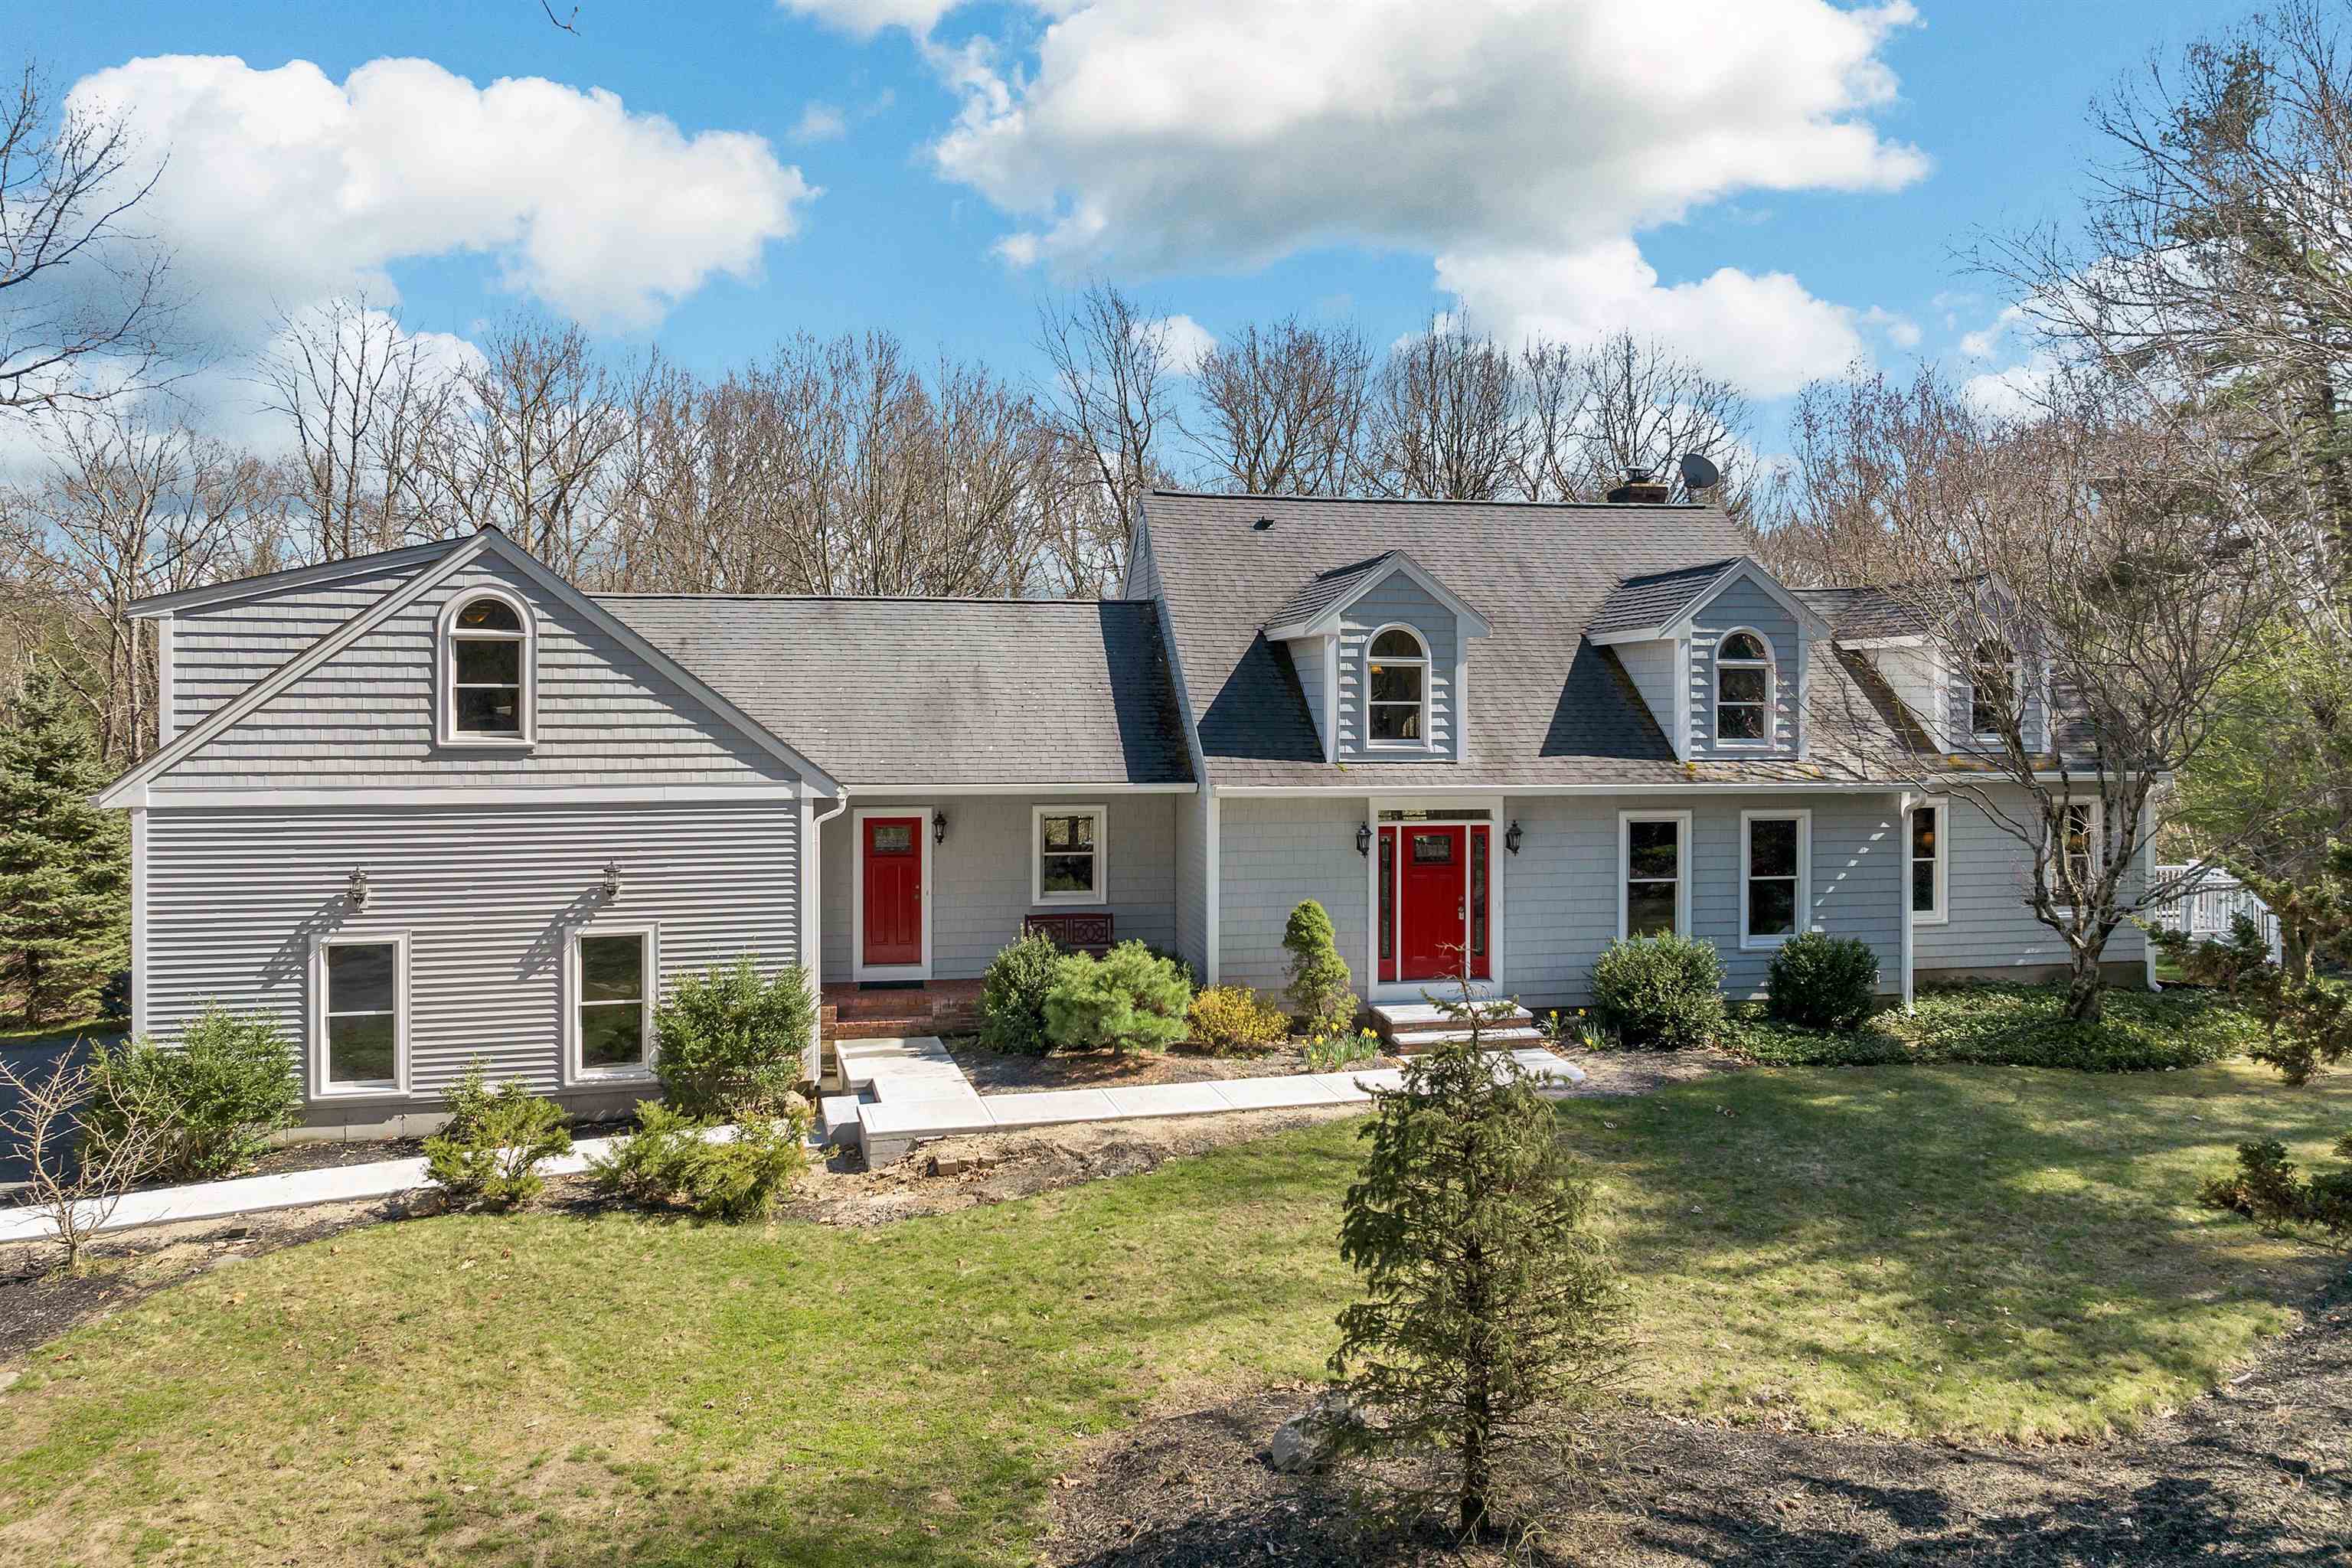 This distinctive, custom cape is privately tucked off the road on a 9.28 acre lot with a first floor Primary bedroom suite. Handsome leaded glass entryway leads to a dramatic open foyer with gleaming hardwoods. The bright and airy great-room offers vaulted ceilings and custom floor to ceiling window overlooking the wooded setting. You’re sure to enjoy the pellet stove surrounded by a brick fireplace. The formal dining room is complemented by vaulted ceilings, hardwood floors and lots of windows. The impressive custom kitchen has a huge center island with seating areas, built-in China cabinets, an abundance of cabinet space and stainless-steel appliances. There is also a media room tucked off the great-room behind French doors. With crown moldings and hardwoods it could serve as a formal dining room as well. The first-floor Primary bedroom suite features a walk-in closet, beautiful bath with spa tub and atrium style door opening to a private balcony. The second floor offers two spacious bedrooms and a full bath. Off the back hall you’ll find the laundry, pantry and powder room and the stairs to a beautiful bonus room over the three-car garage. There is a spacious multi-level deck and big back yard. Plus you’ll love the energy saving features such as the solar panels. The full basement has daylight windows and walks-out to both the back yard and into the garage. What a great opportunity in the desirable town of Windham.